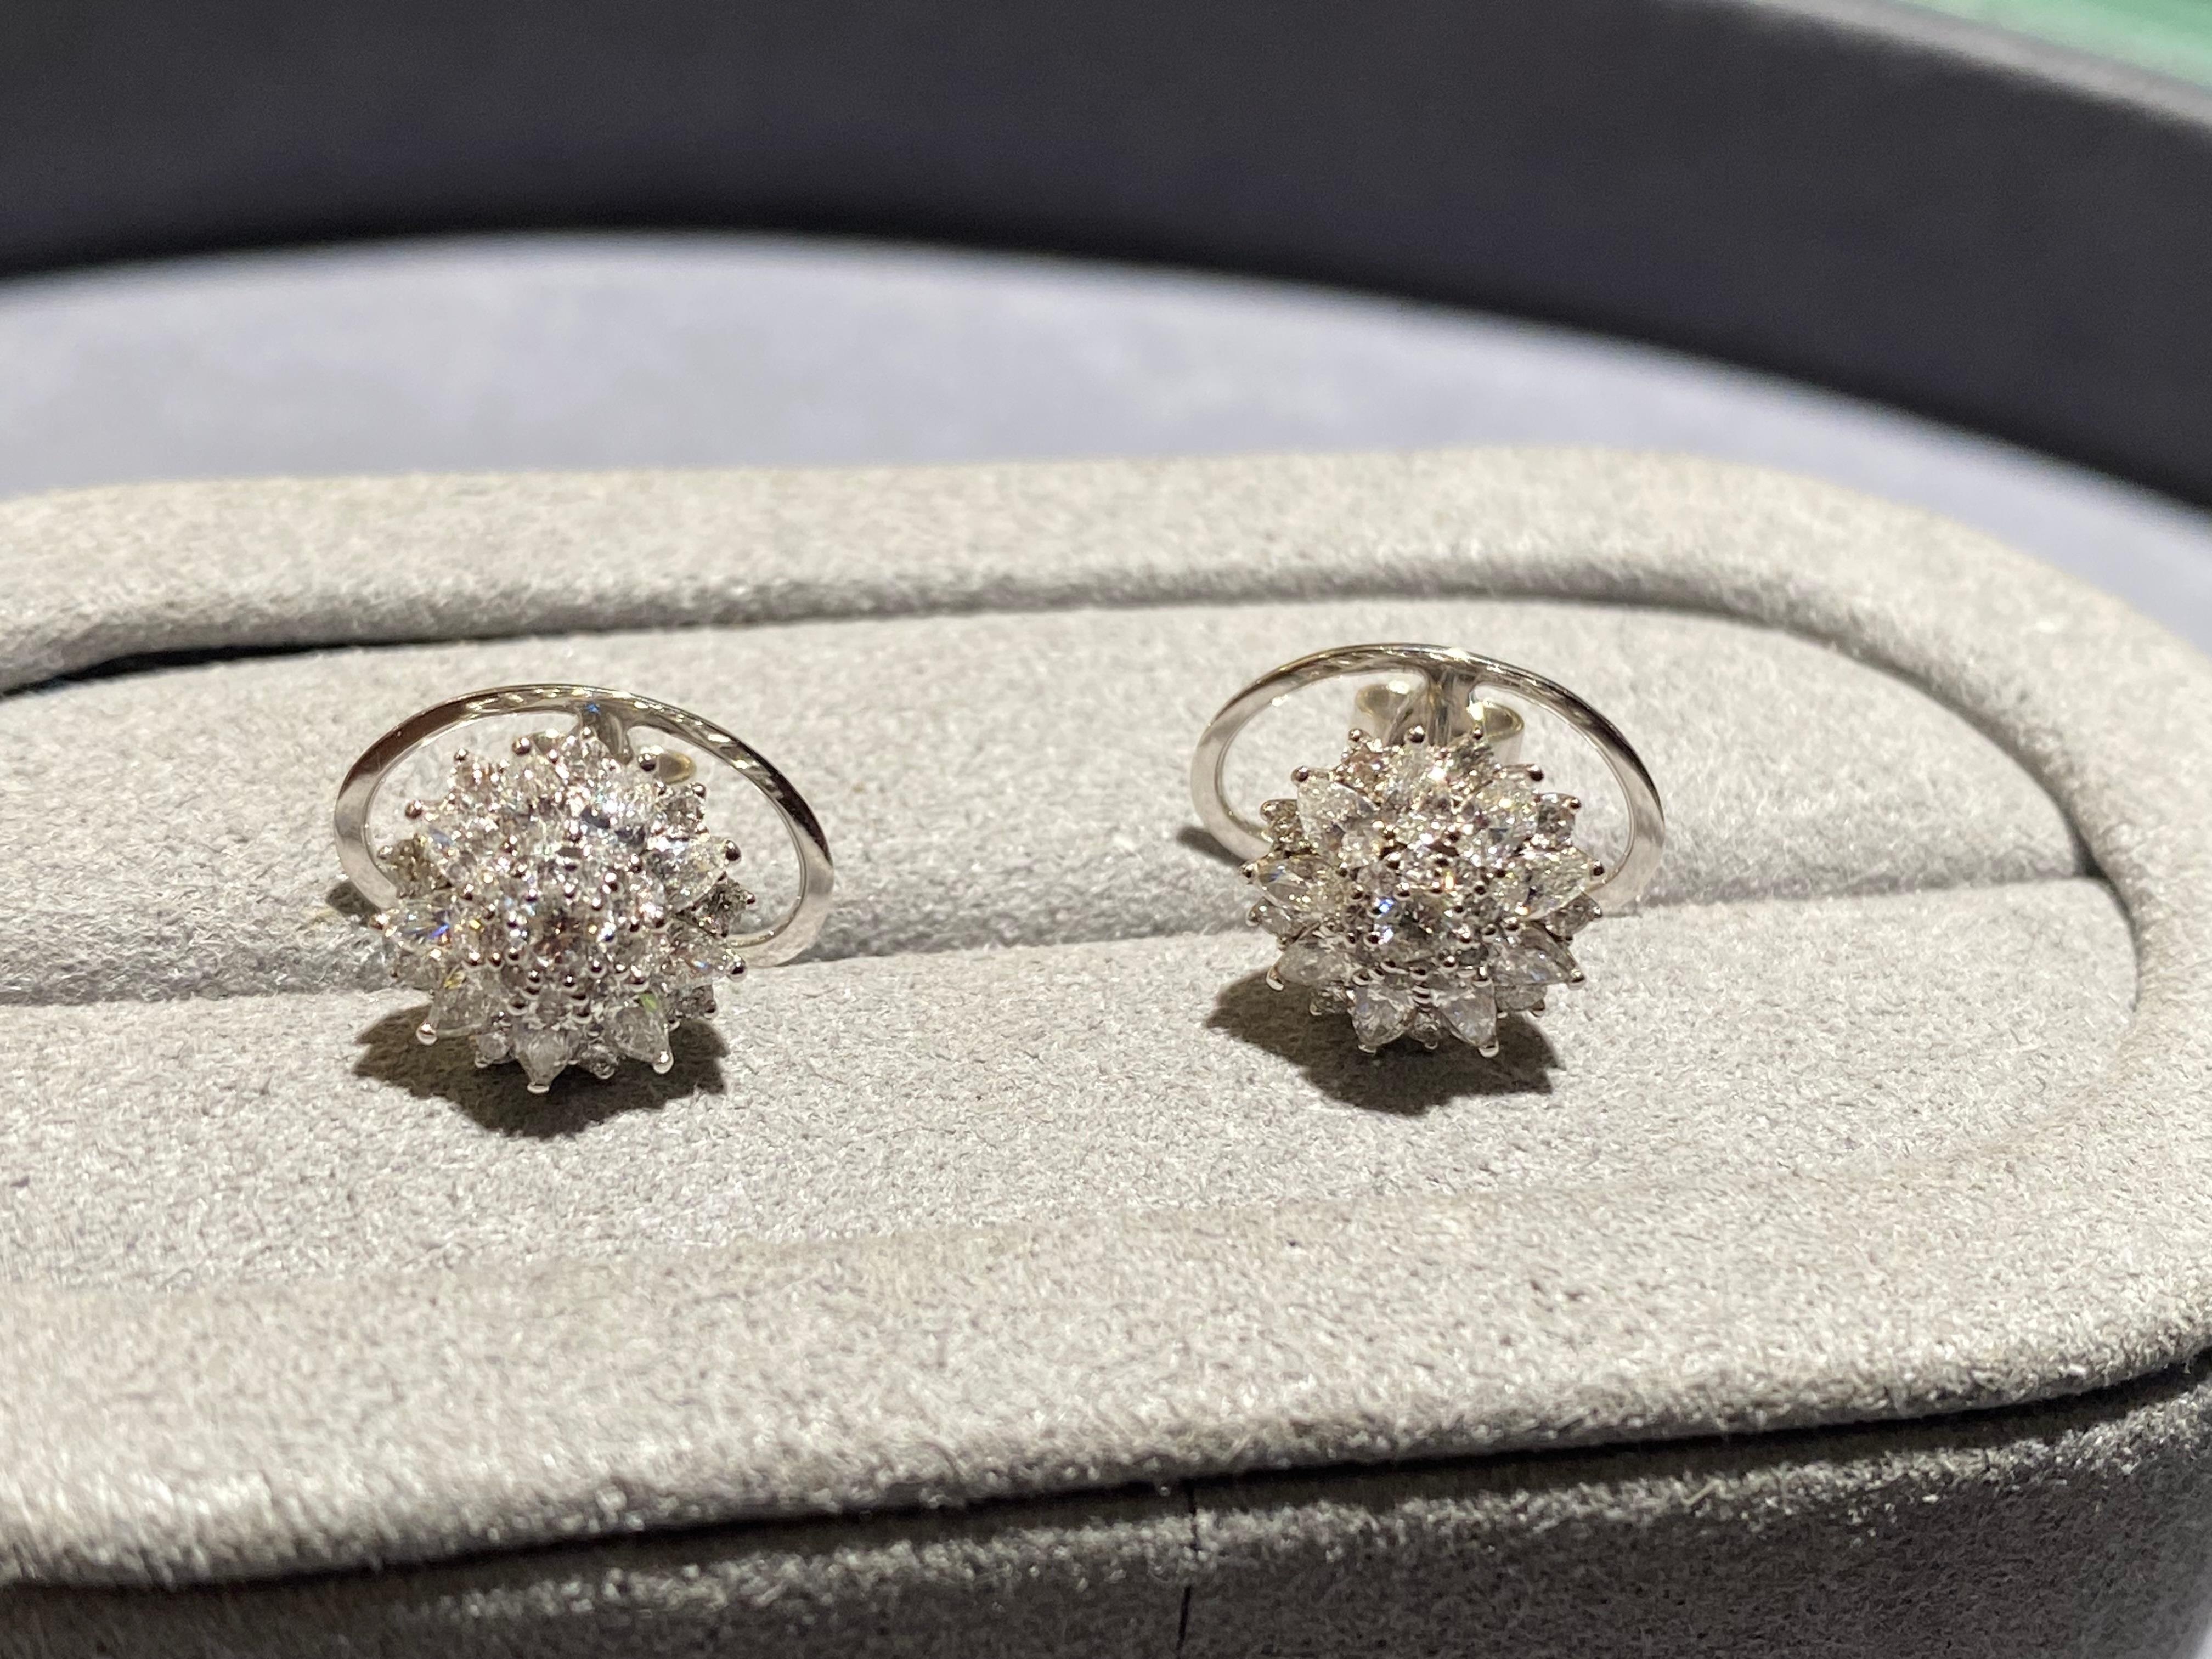 A pair of flower motif diamond earrings in 18k white gold. A round brilliant cut diamond is set in the middle of the flower motif with a circle of micro diamonds surrounding the middle. On the outer layer there are multiple rain drop diamonds and in